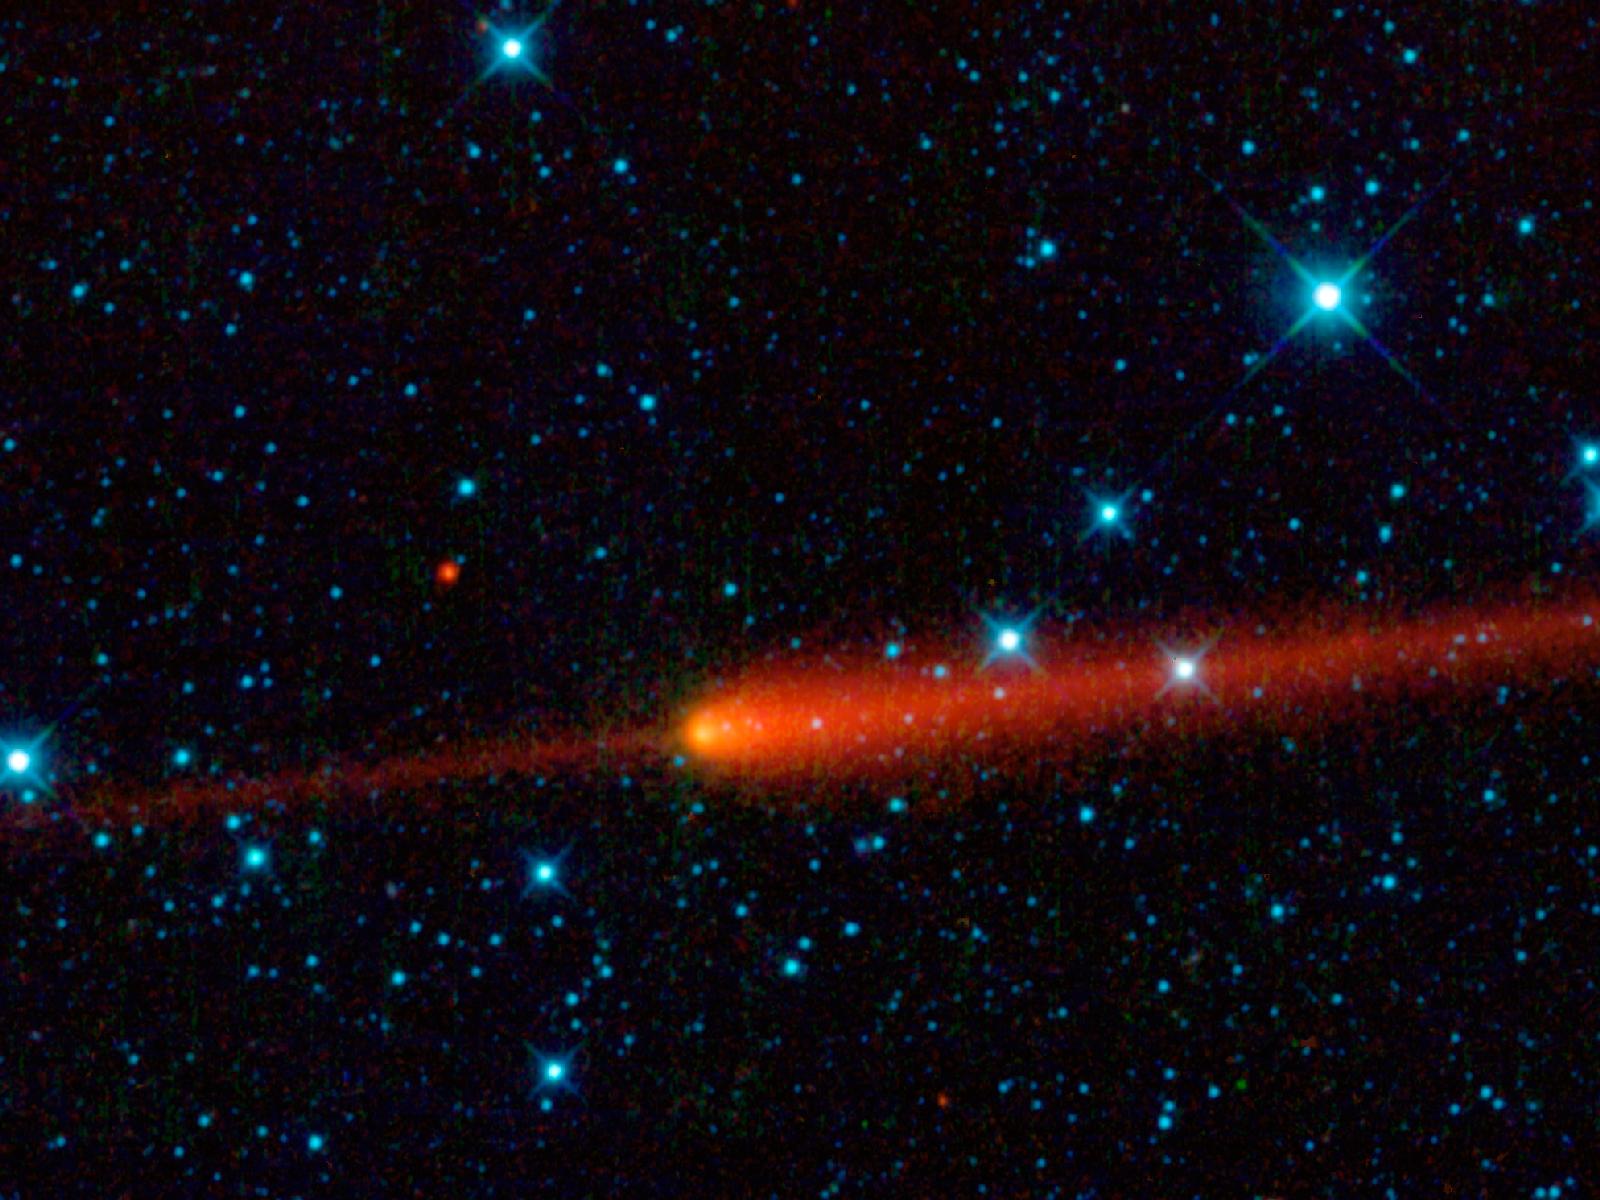 Comet 65/P Gunn looks like a match with a flame against a starry background. A thin stripe of red runs from the left side of the image almost to the middle where a bright red and yellow ball flares up with a tail tapering off to the right.